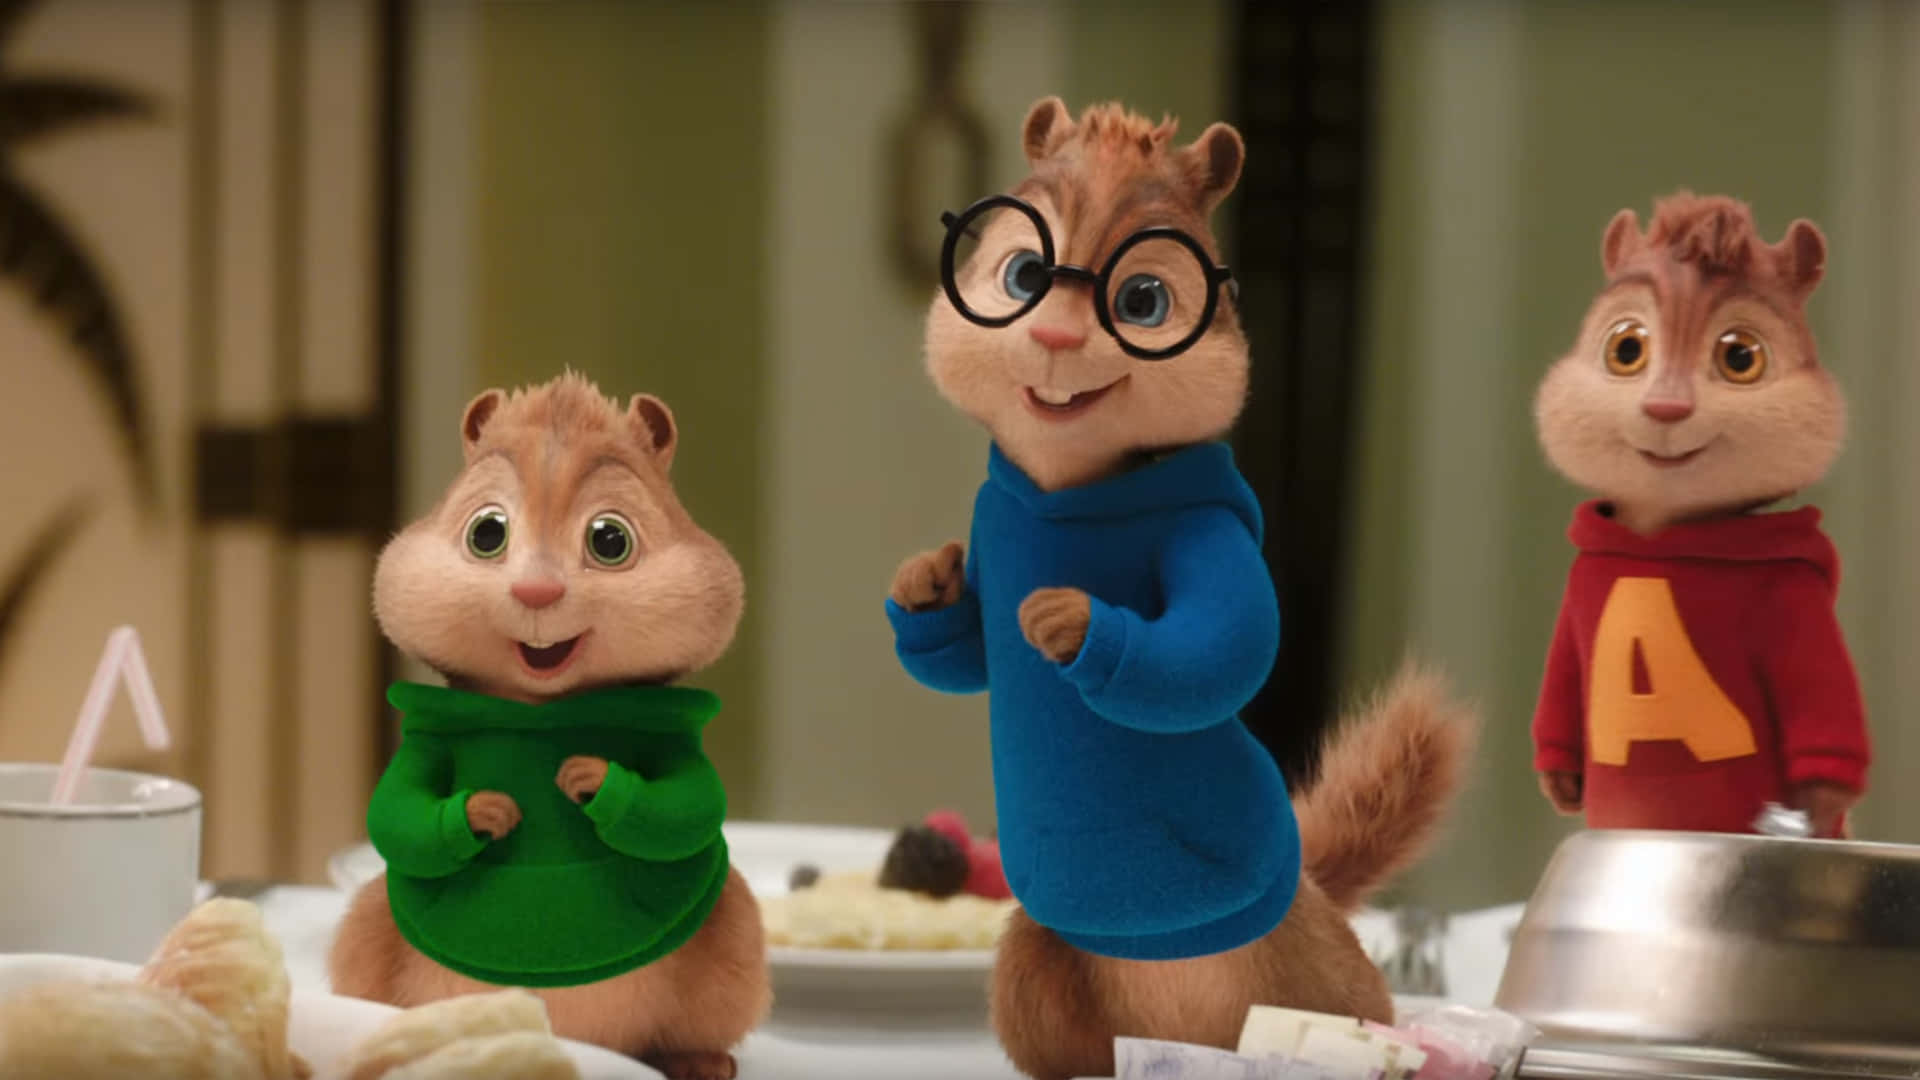 Enjoy singing and dancing with Alvin And The Chipmunks